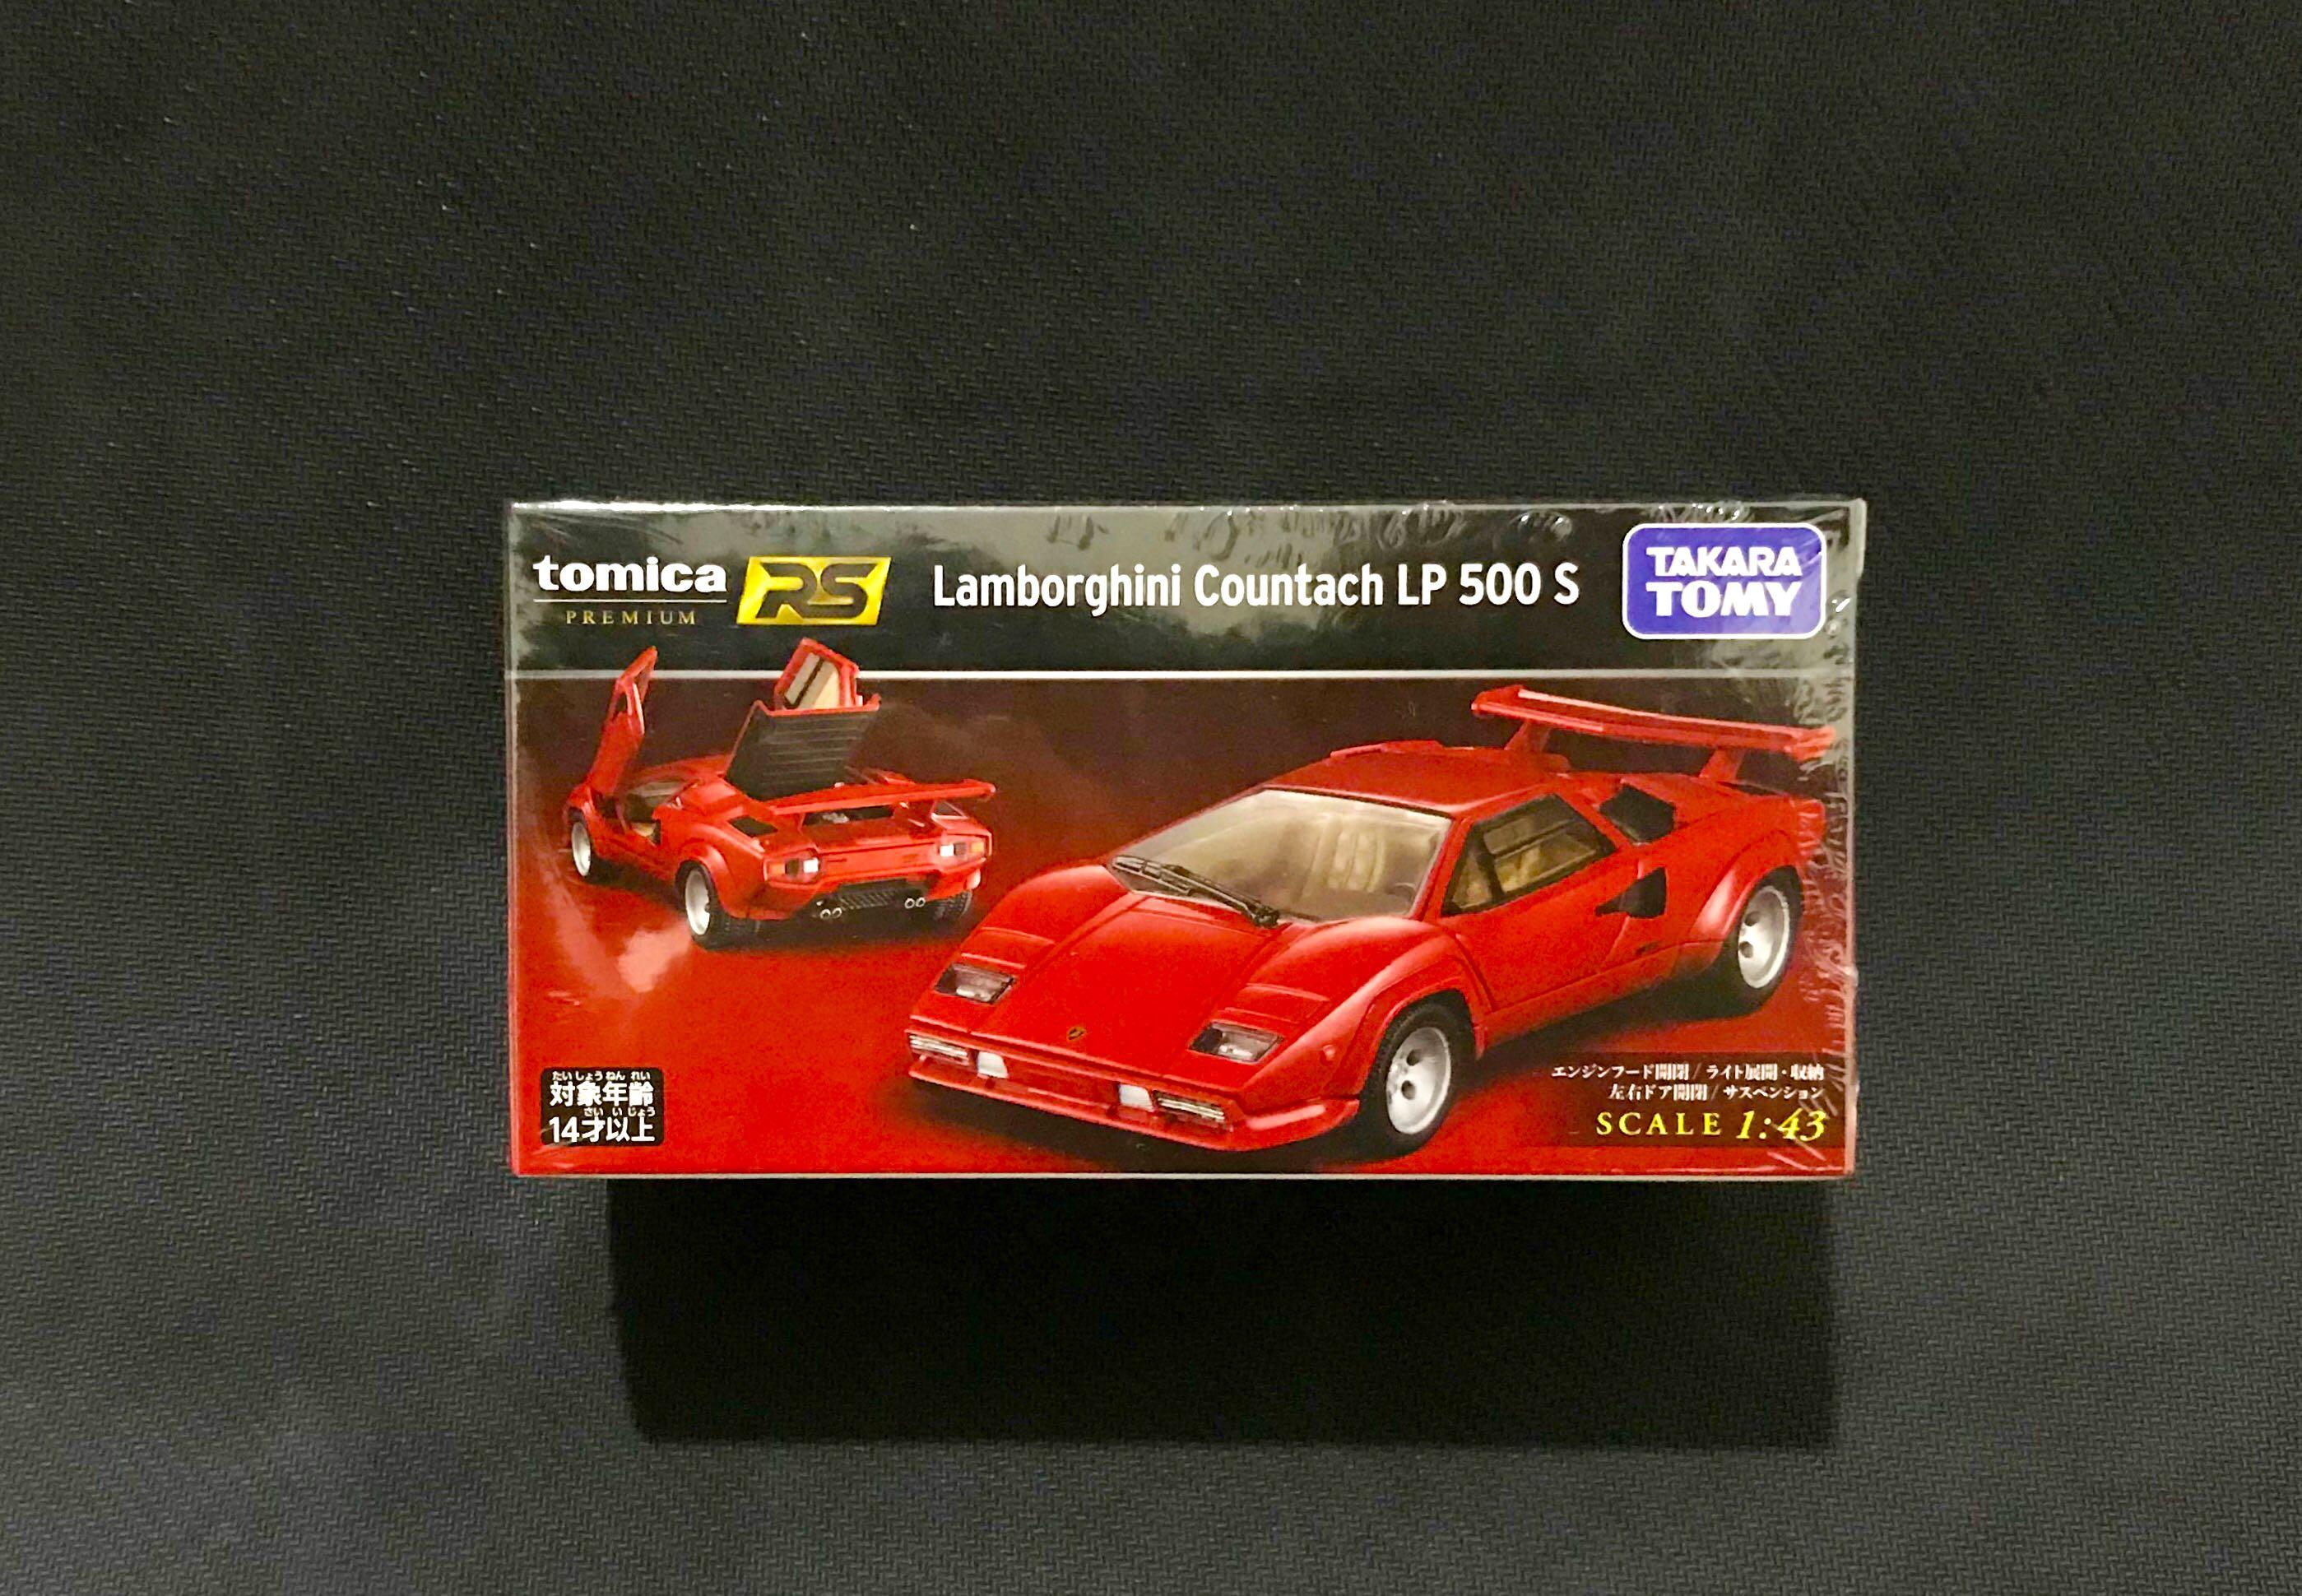 1/43 Tomica Premium RS Lamborghini Countach LP500 S Red, Hobbies  Toys,  Toys  Games on Carousell